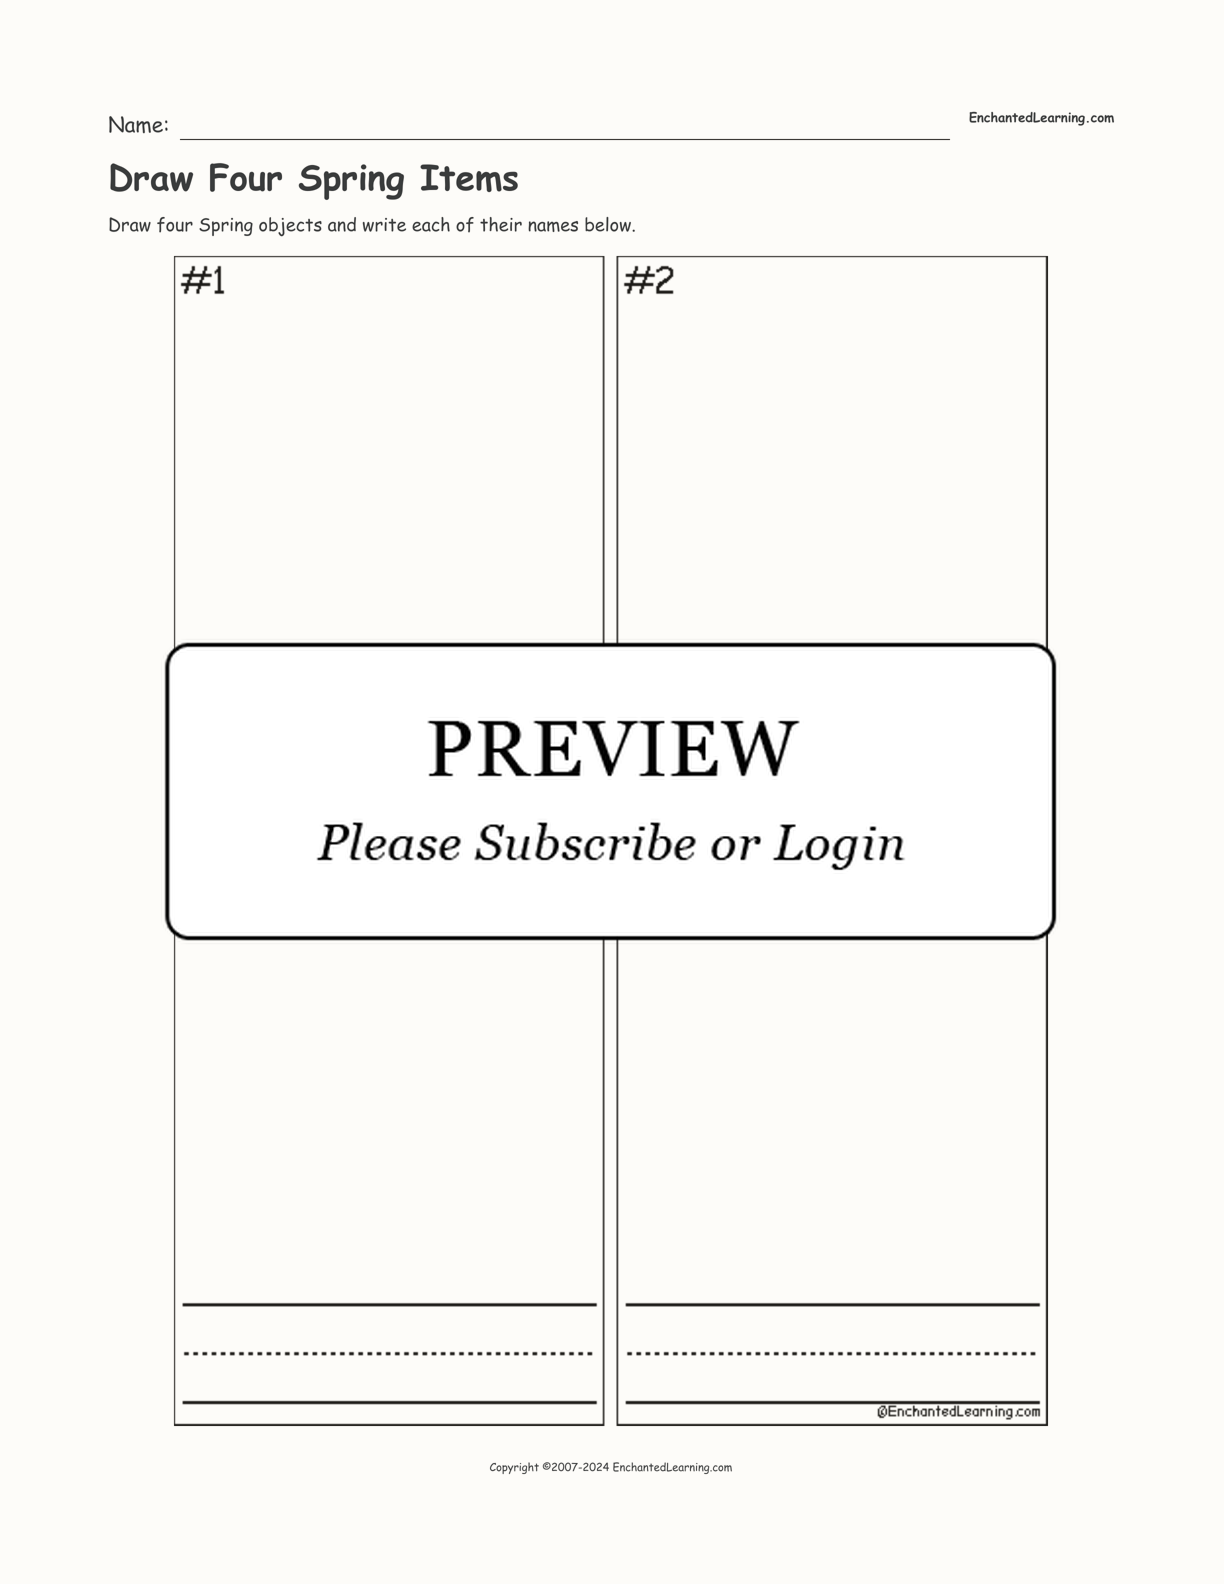 Draw Four Spring Items interactive worksheet page 1